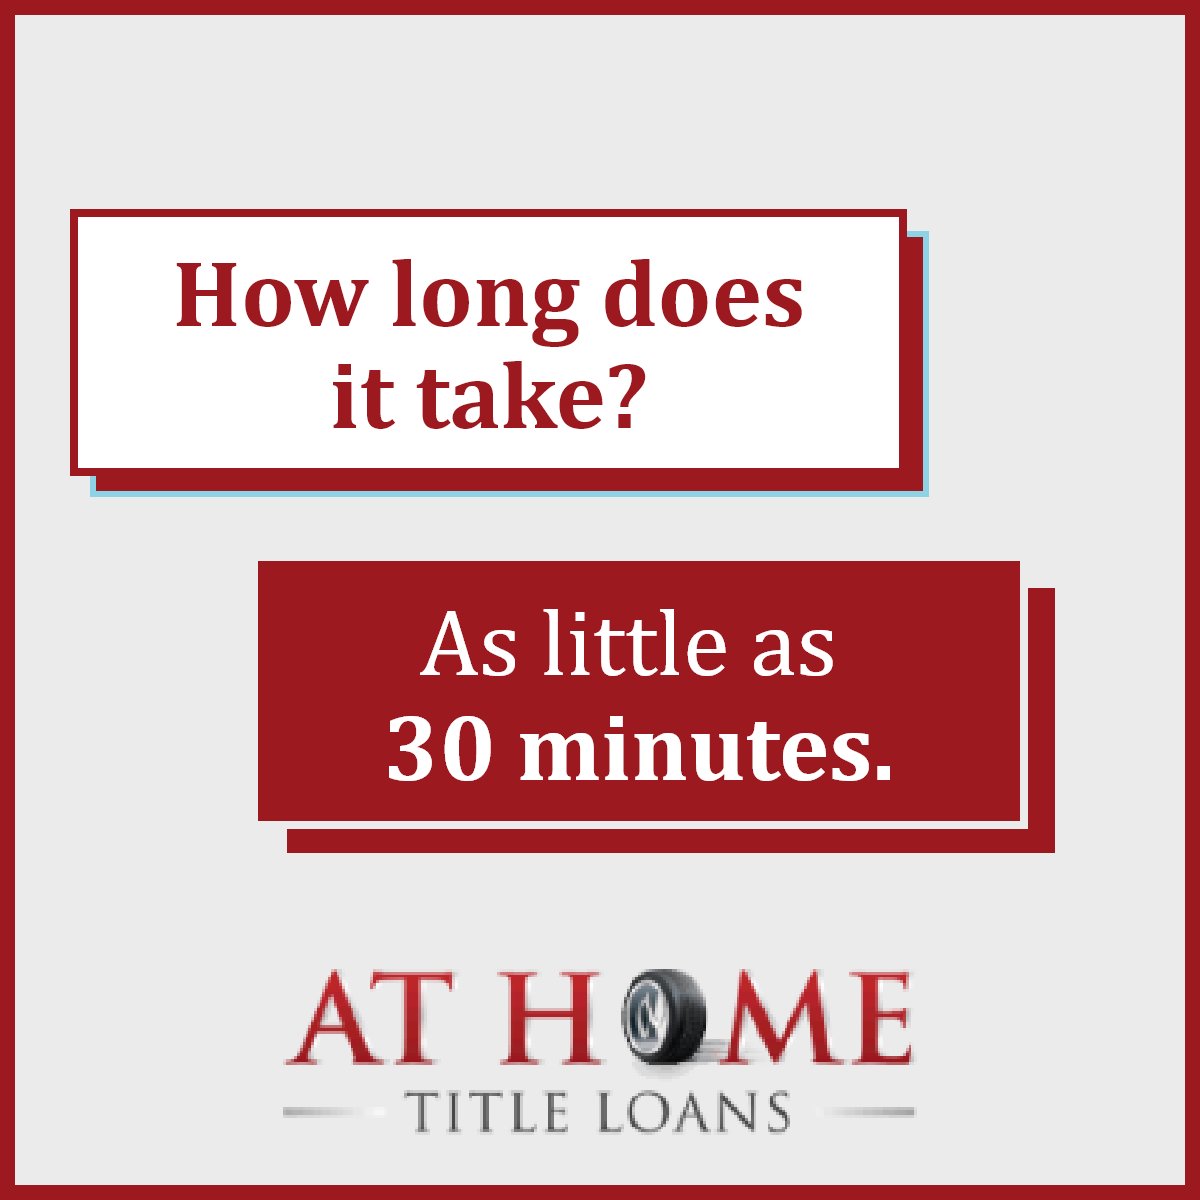 Need cash now? Get approved for same day title loans online or in-store, in as little as 30 minutes – or less!🚗💸⏰ Log on to our website and fill out the online form to get started: athometitleloans.com 

#onlinetitleloans #onlinetitlepawn #autotitleloans #AtHomeTitleLoans